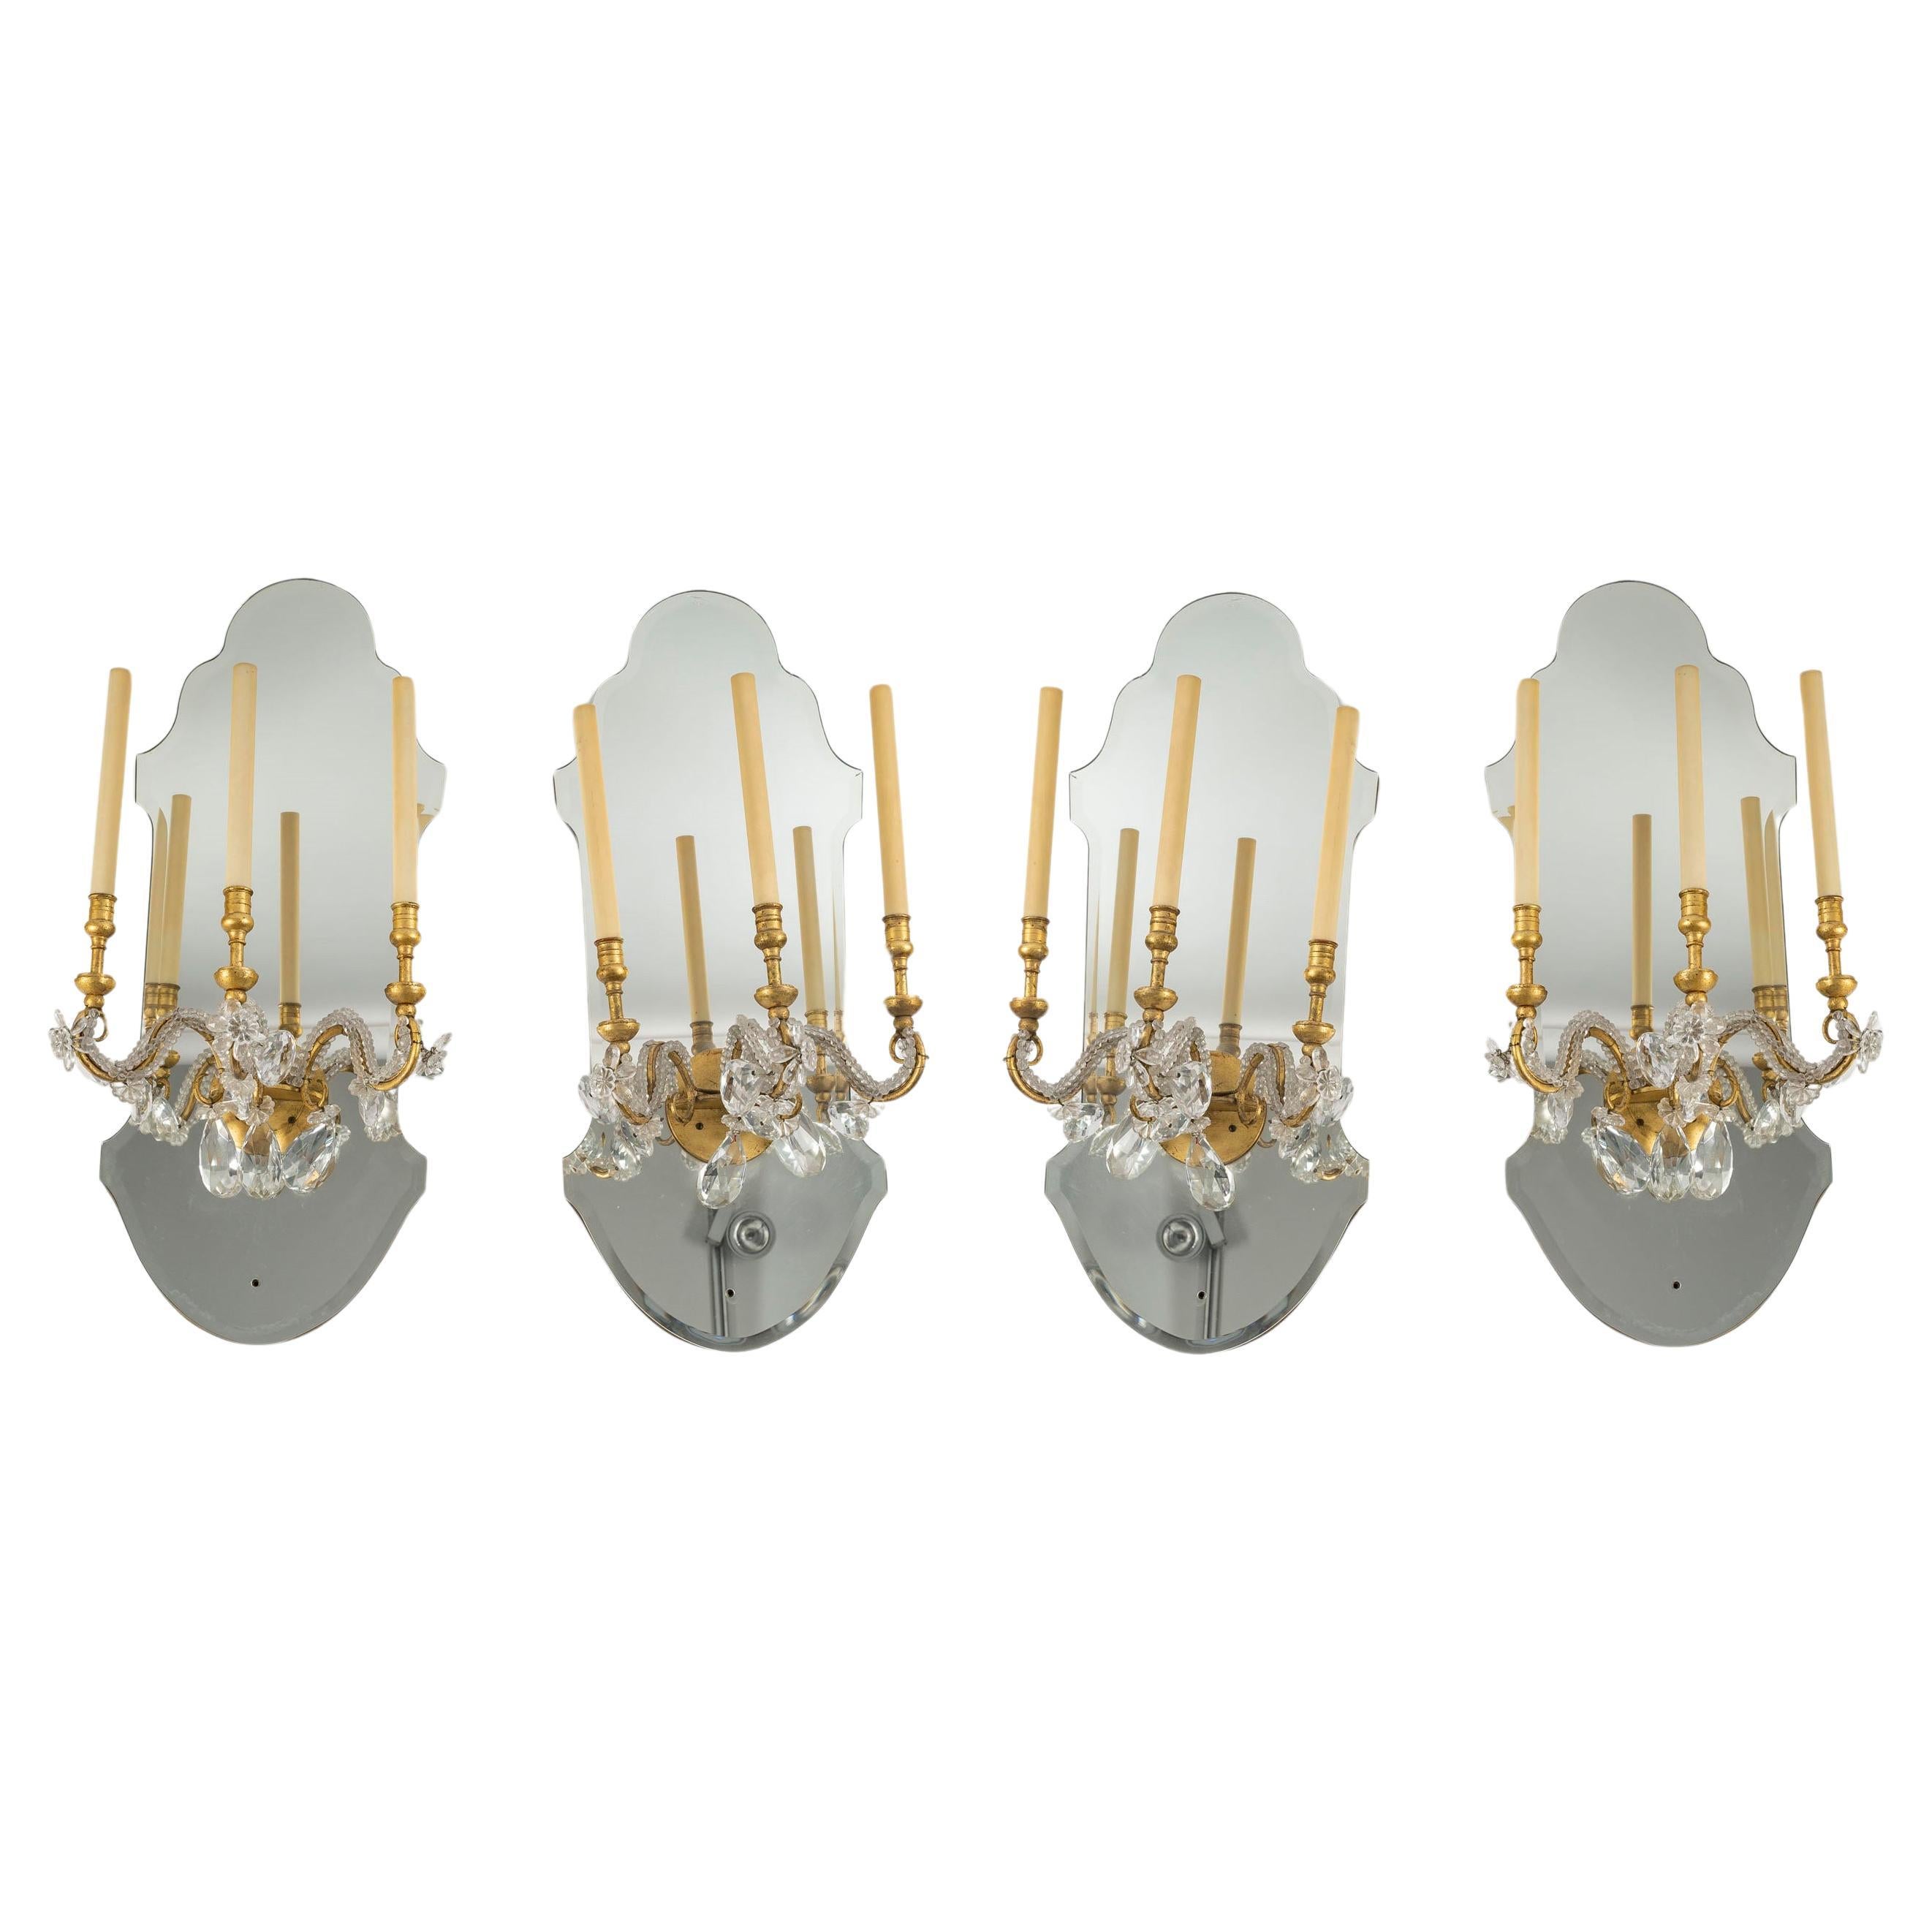 Suite of 4 Gilded Iron and Mirror Sconces with Glass Drops, 1950-1960. For Sale